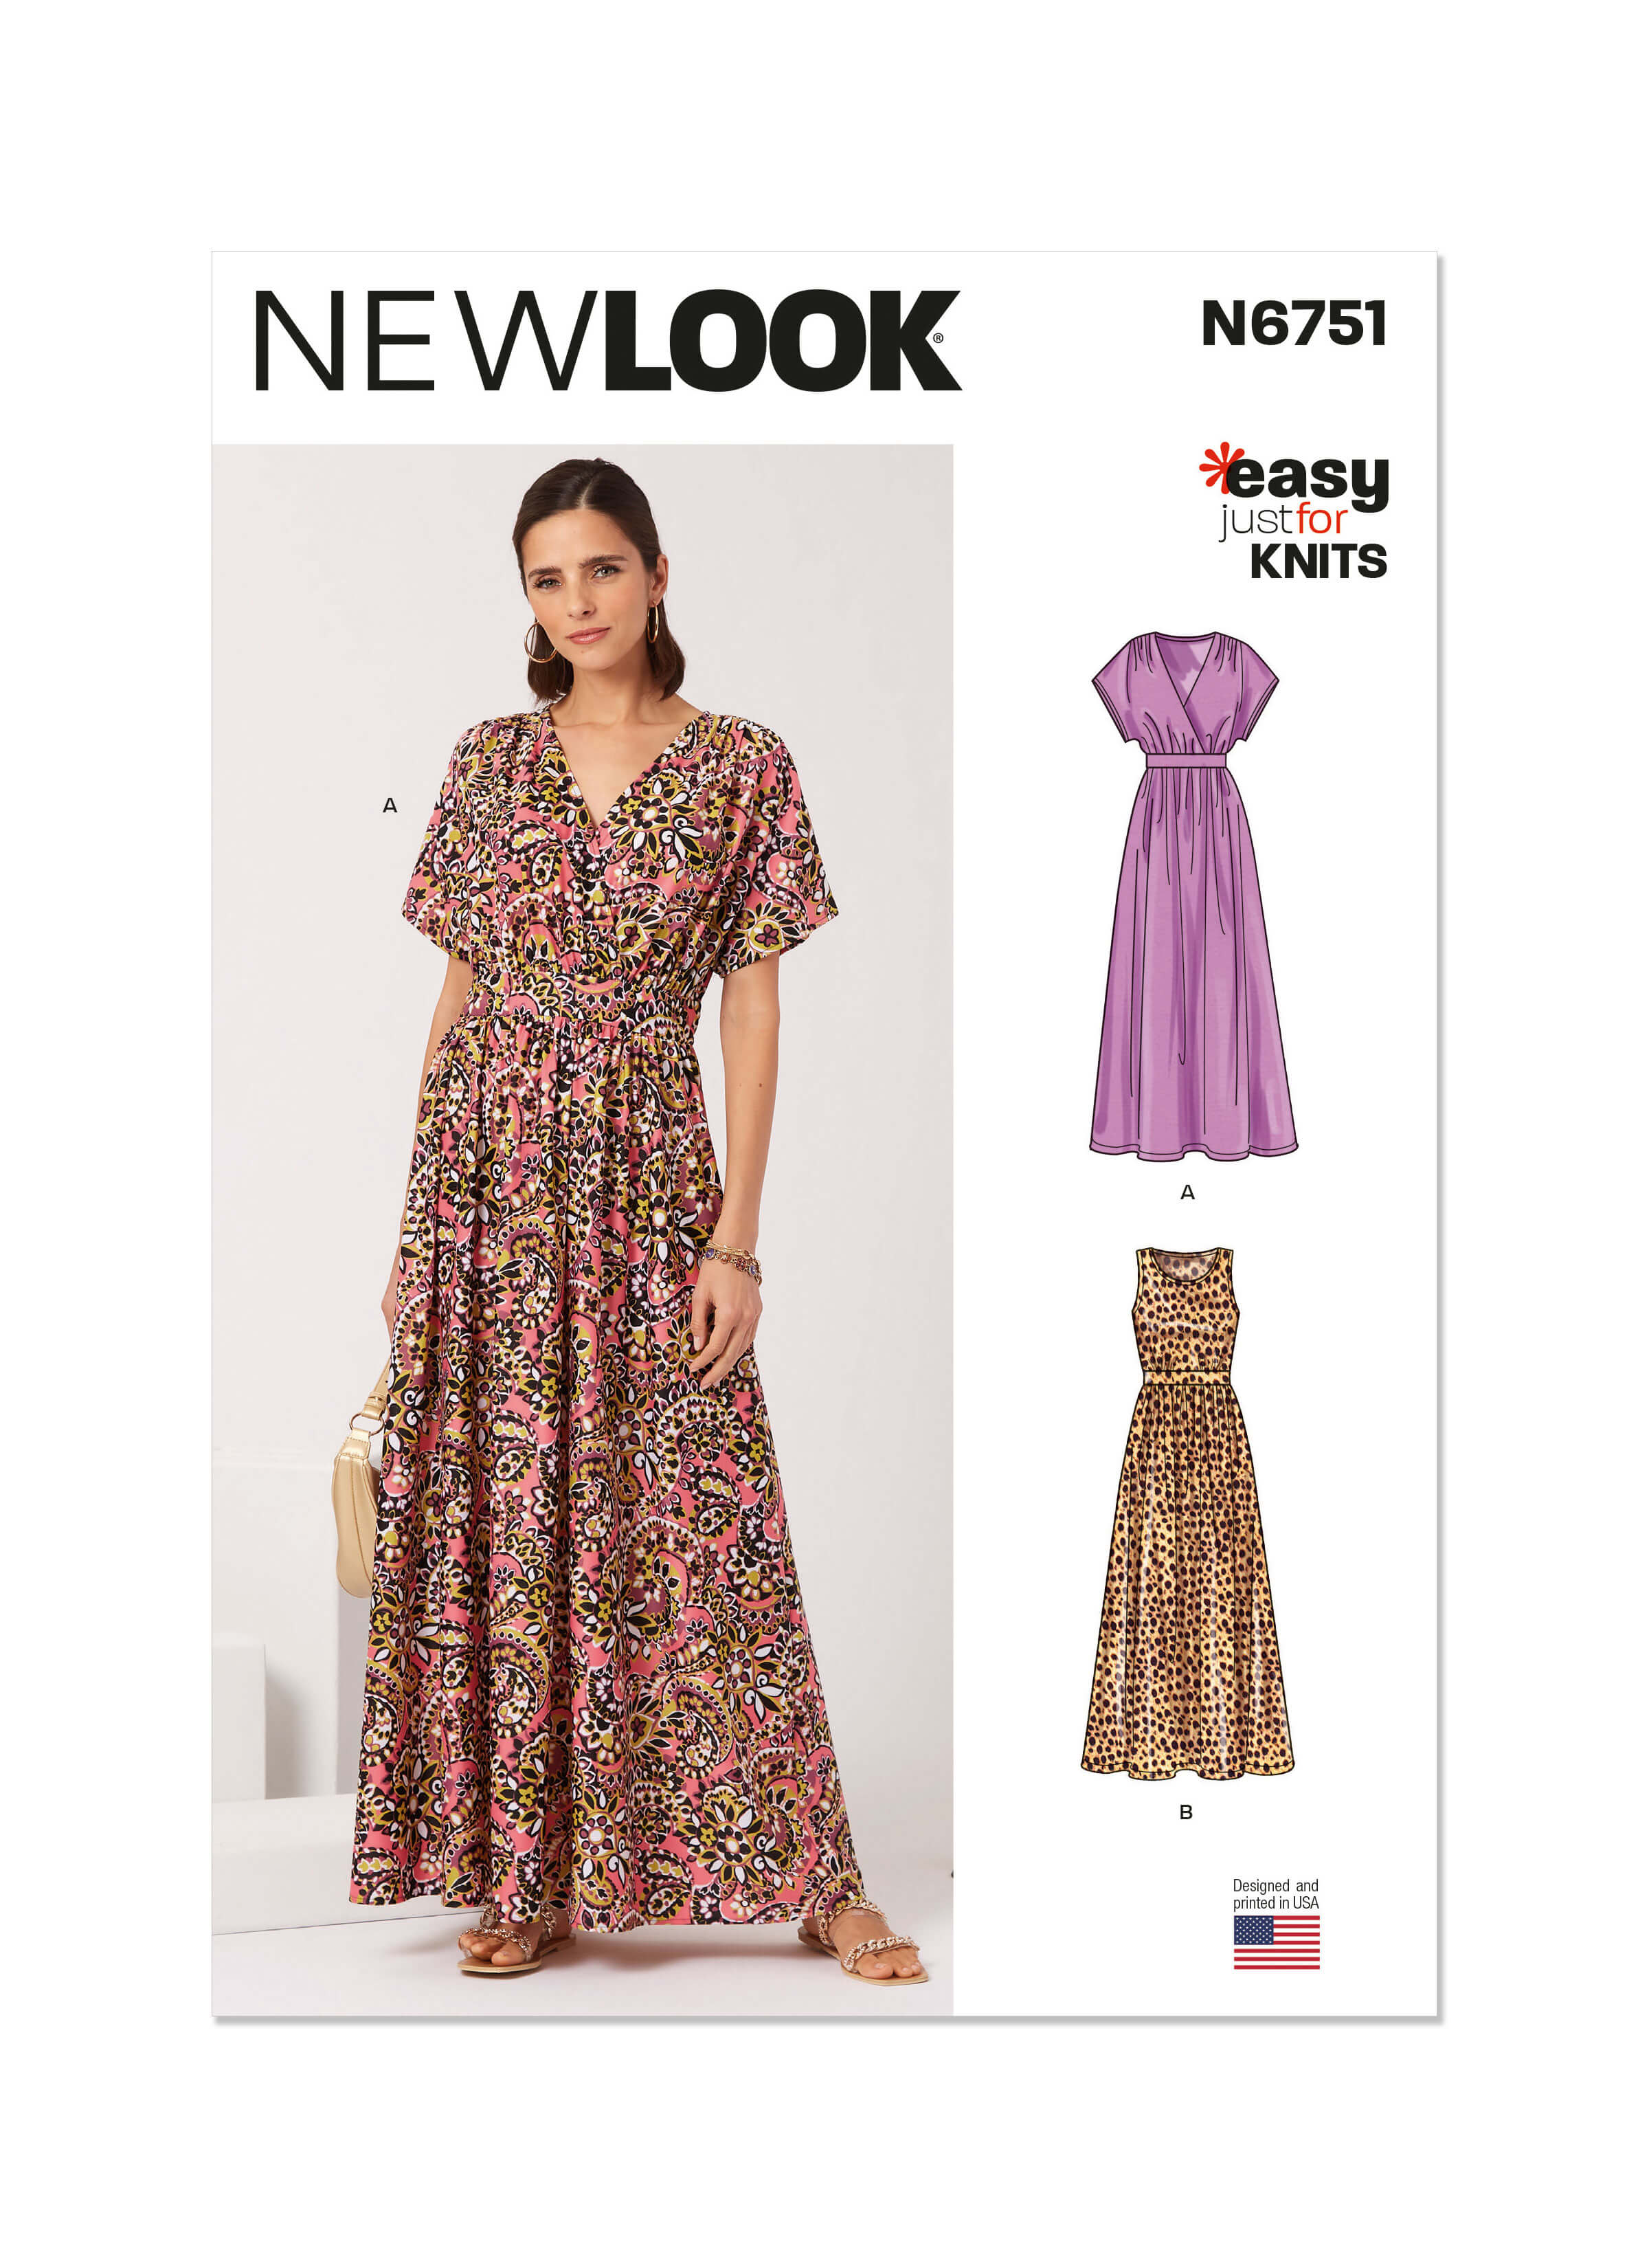 New Look Sewing Pattern N6751 Misses’ Knit Dresses - Sewdirect